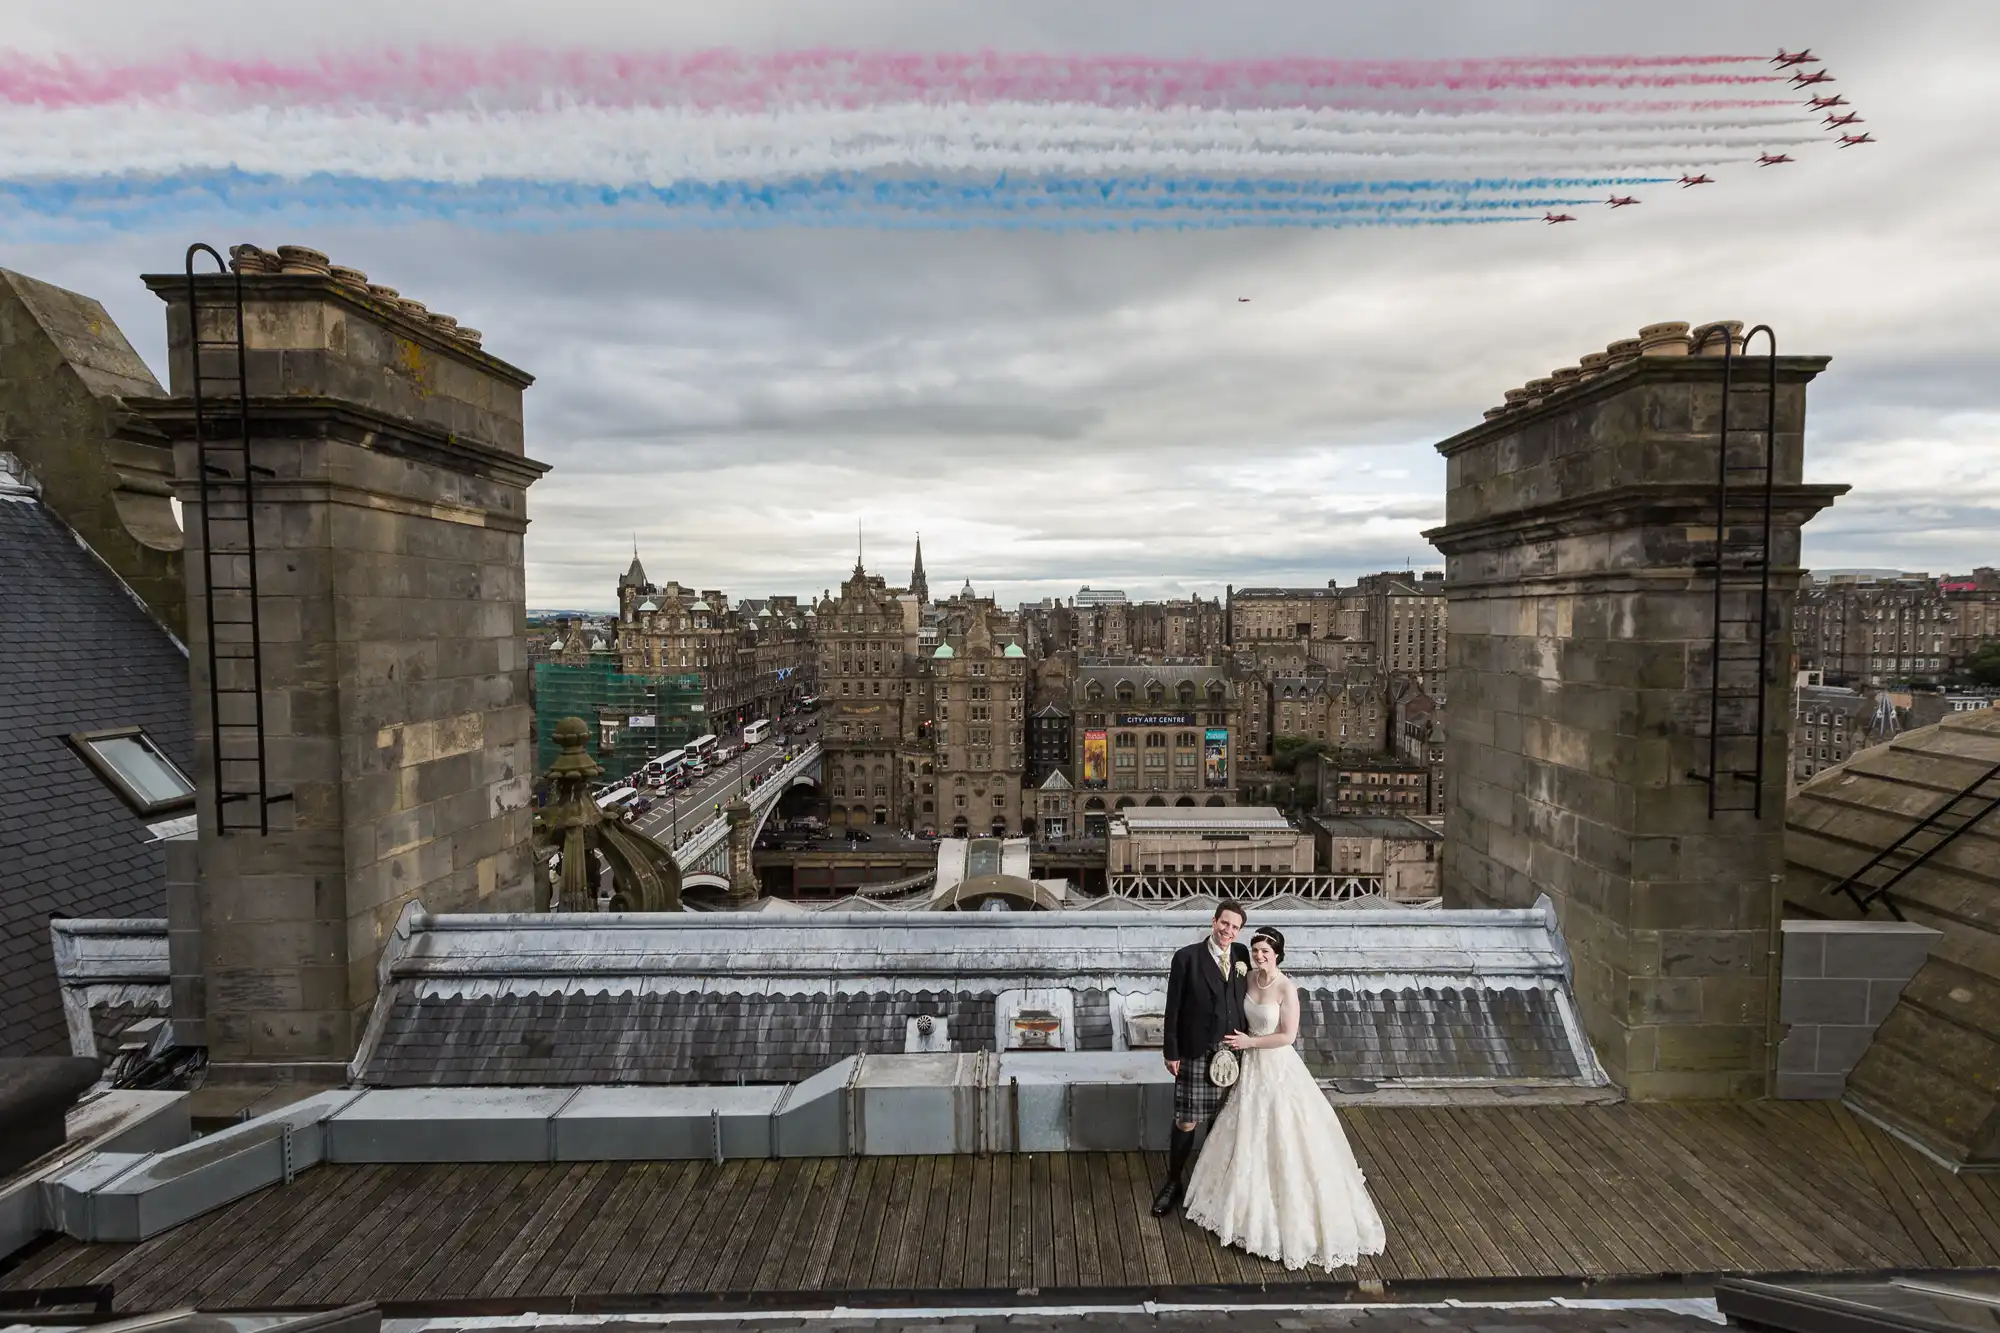 A couple in wedding attire stands on a rooftop, with historic buildings and a formation of aircraft streaming red, white, and blue smoke trails in the background.